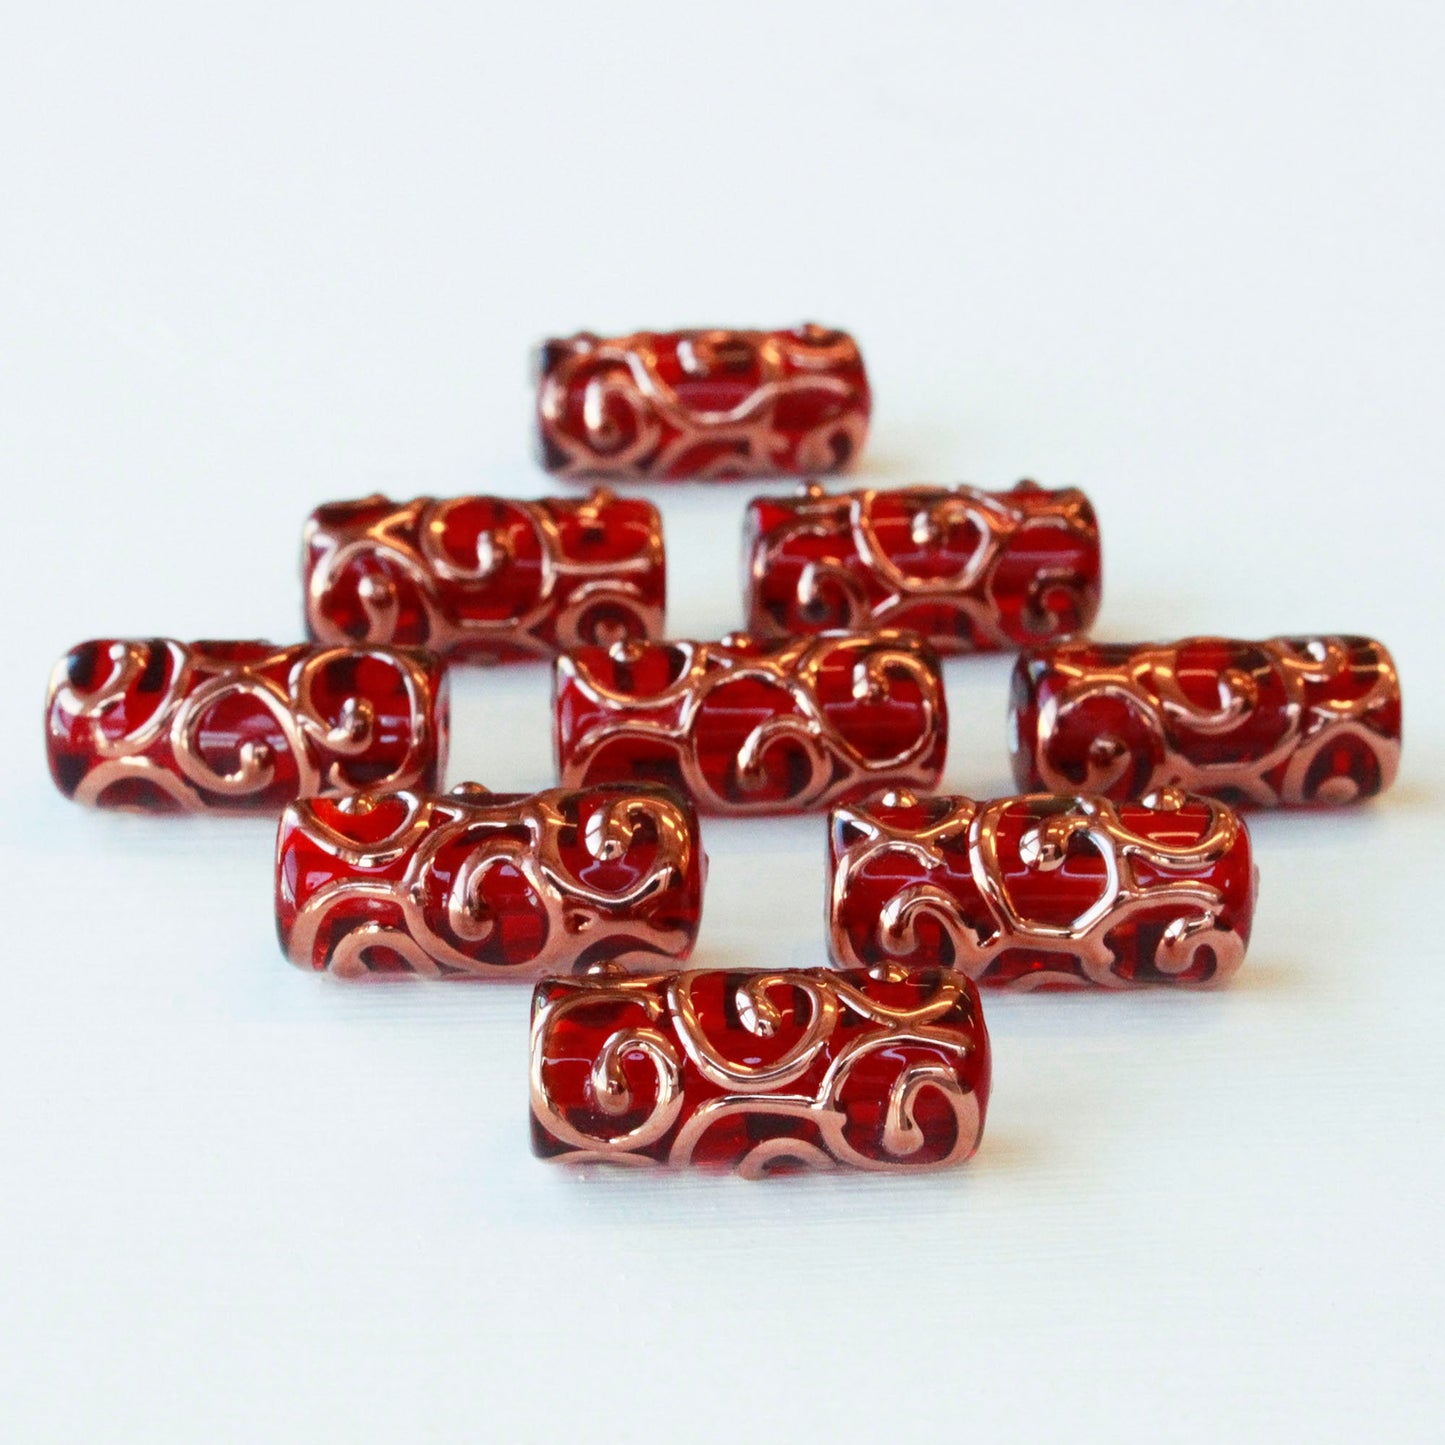 Lampwork Tube Beads - 20x8mm Tube - Red - 2, 4 or 8